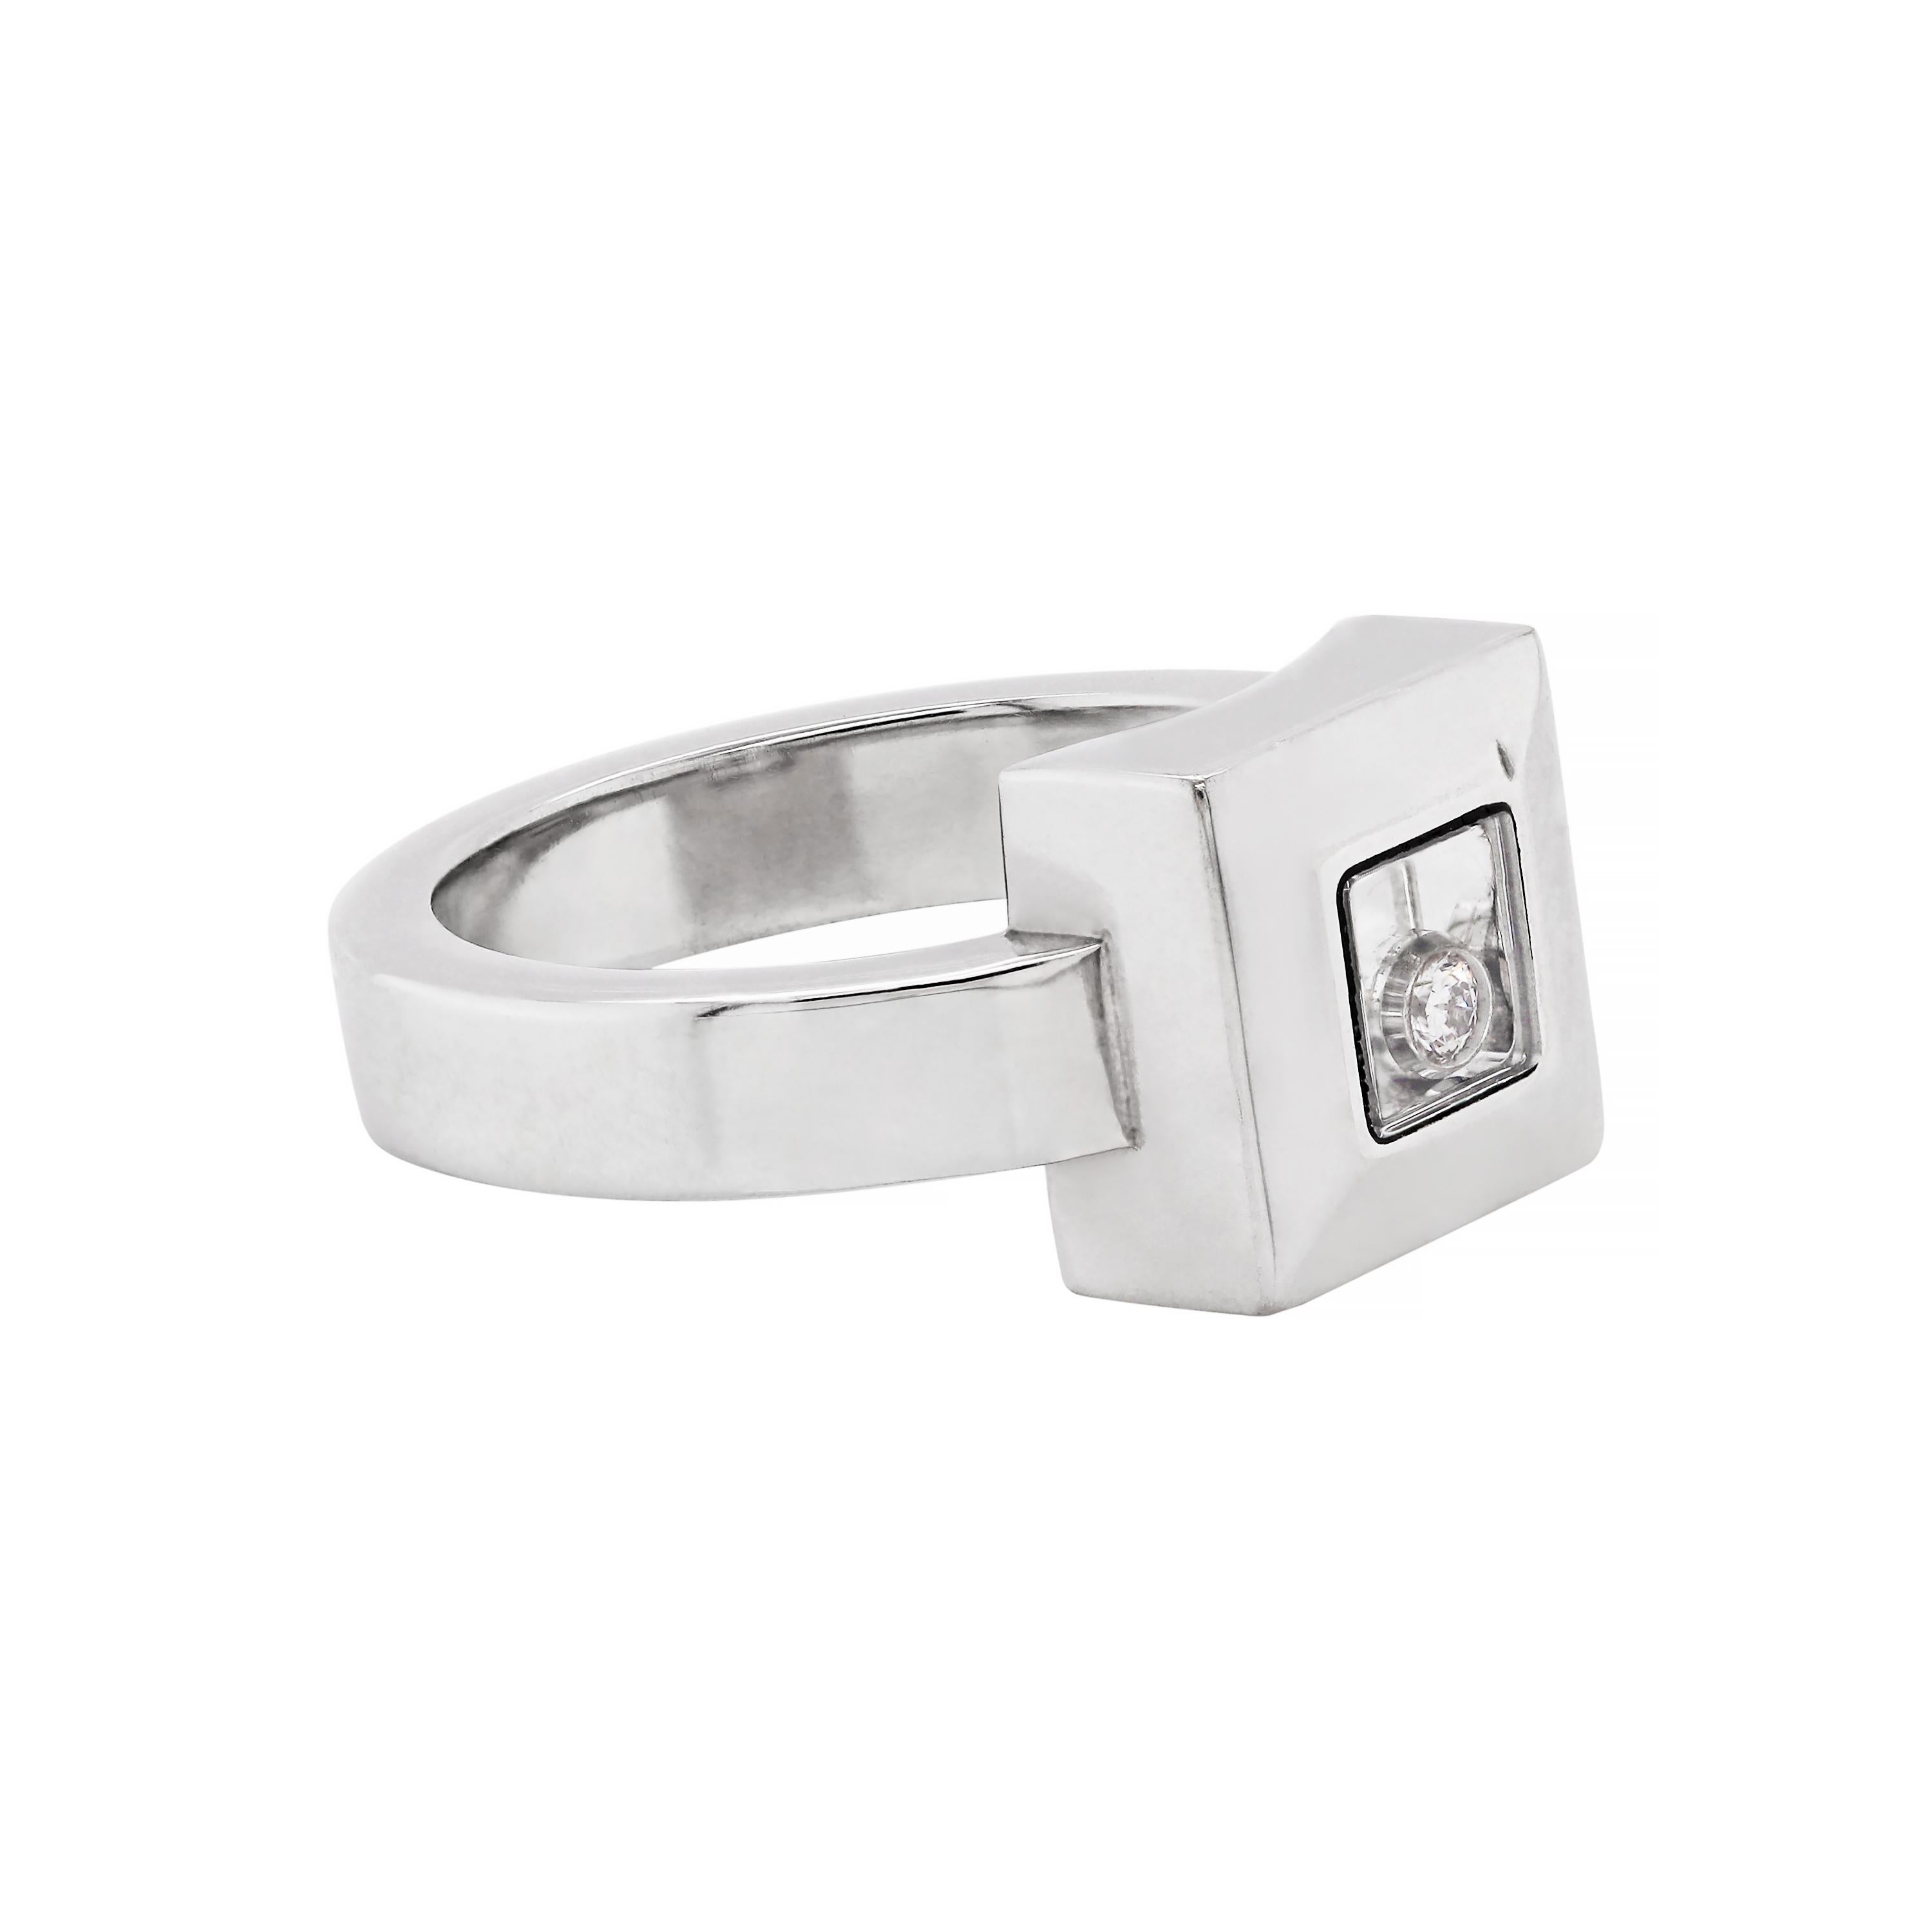 This beautiful Chopard Happy Diamond Icons ring is crafted from 18 carat white gold and features an elegant square frame measuring 1 x 1cm. The Chopard's signature mobile 'happy diamond' is placed between a pair of sapphire crystals which are set in